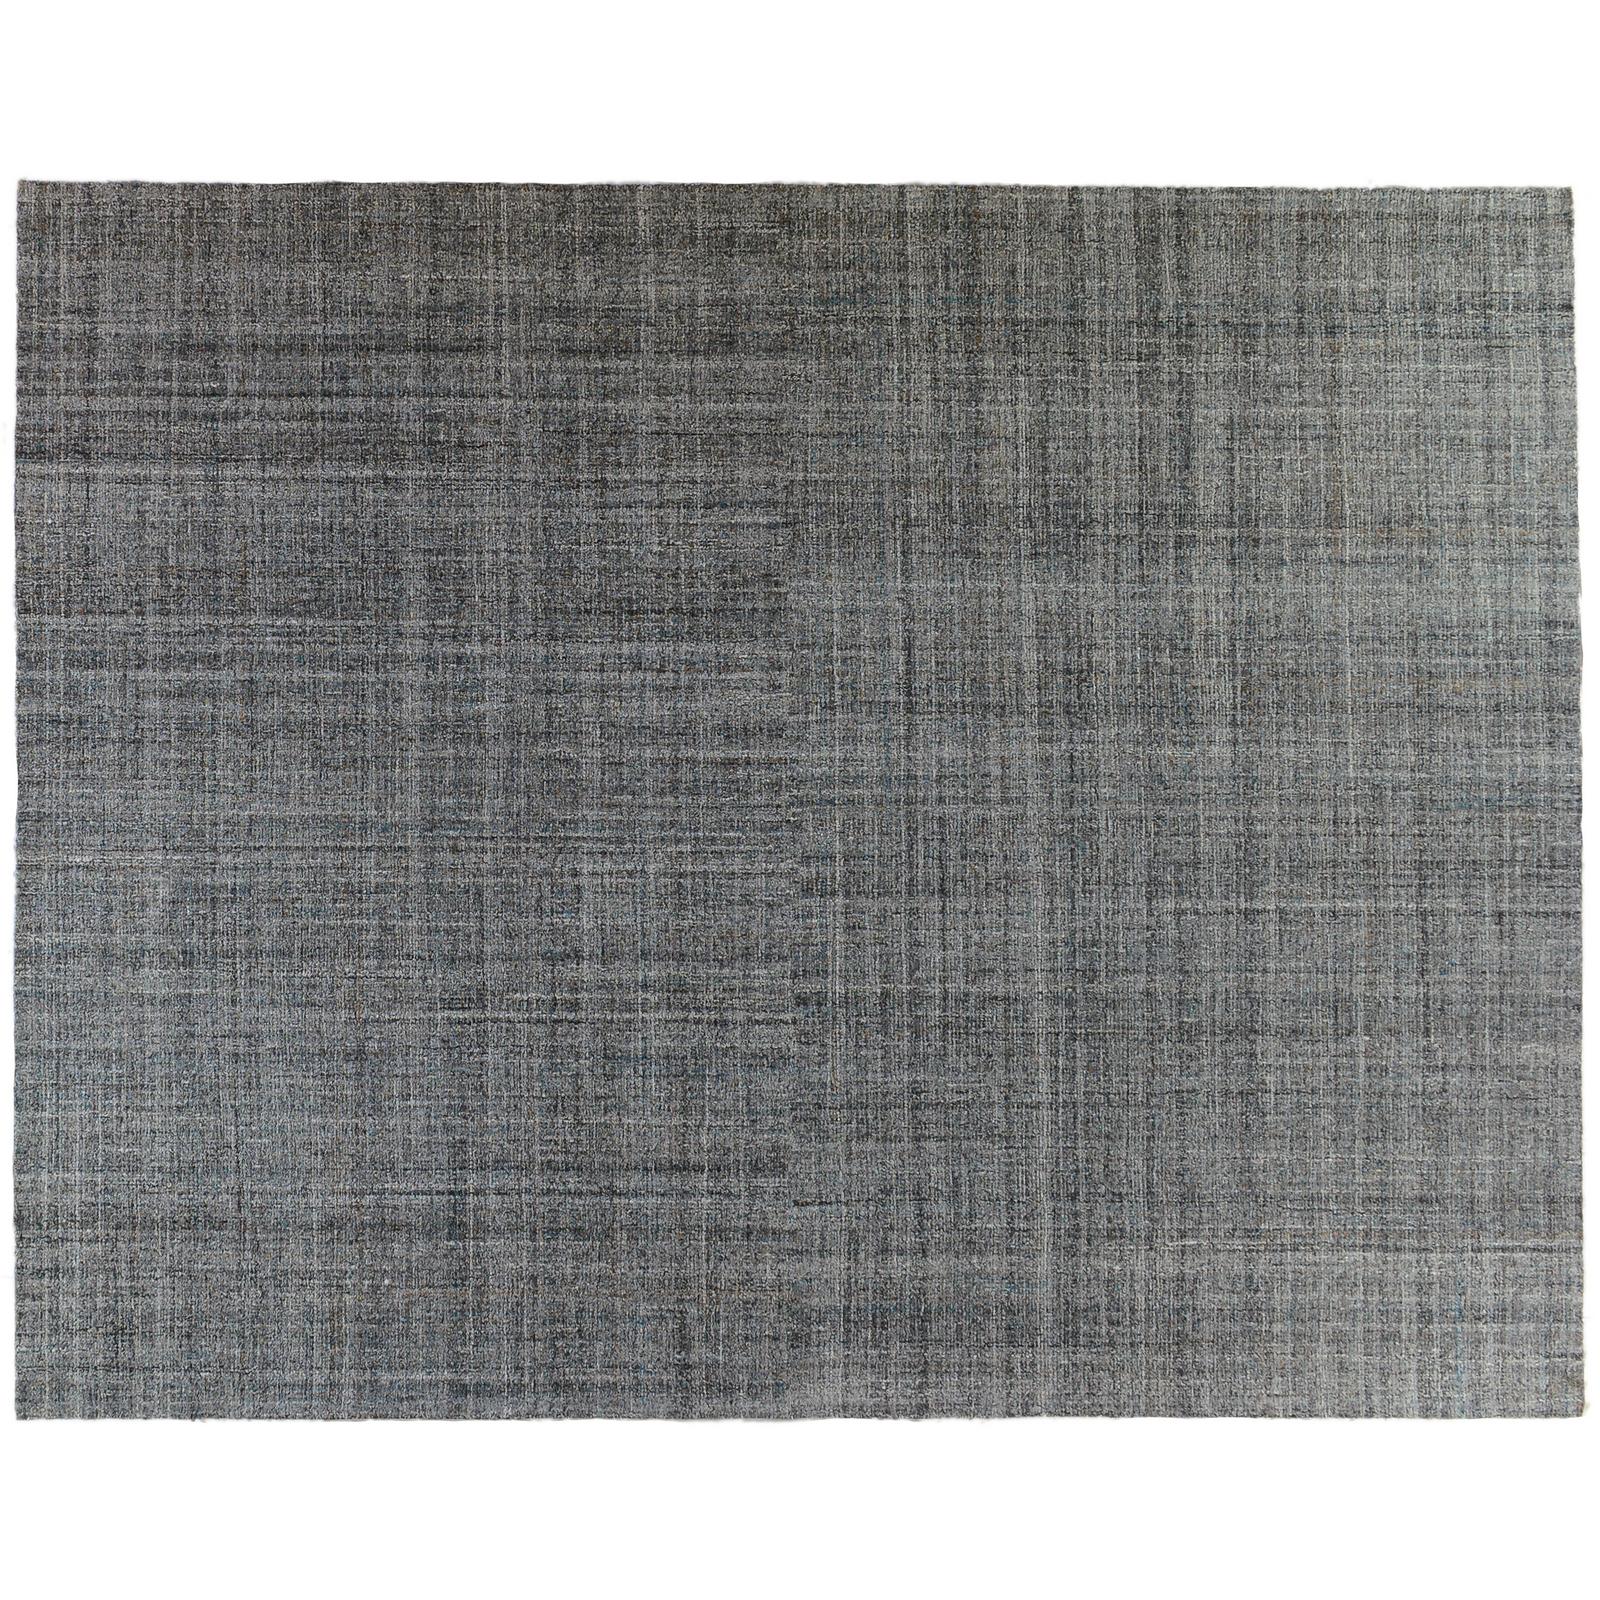 Tufted Multi-Color Wool Area Rug For Sale